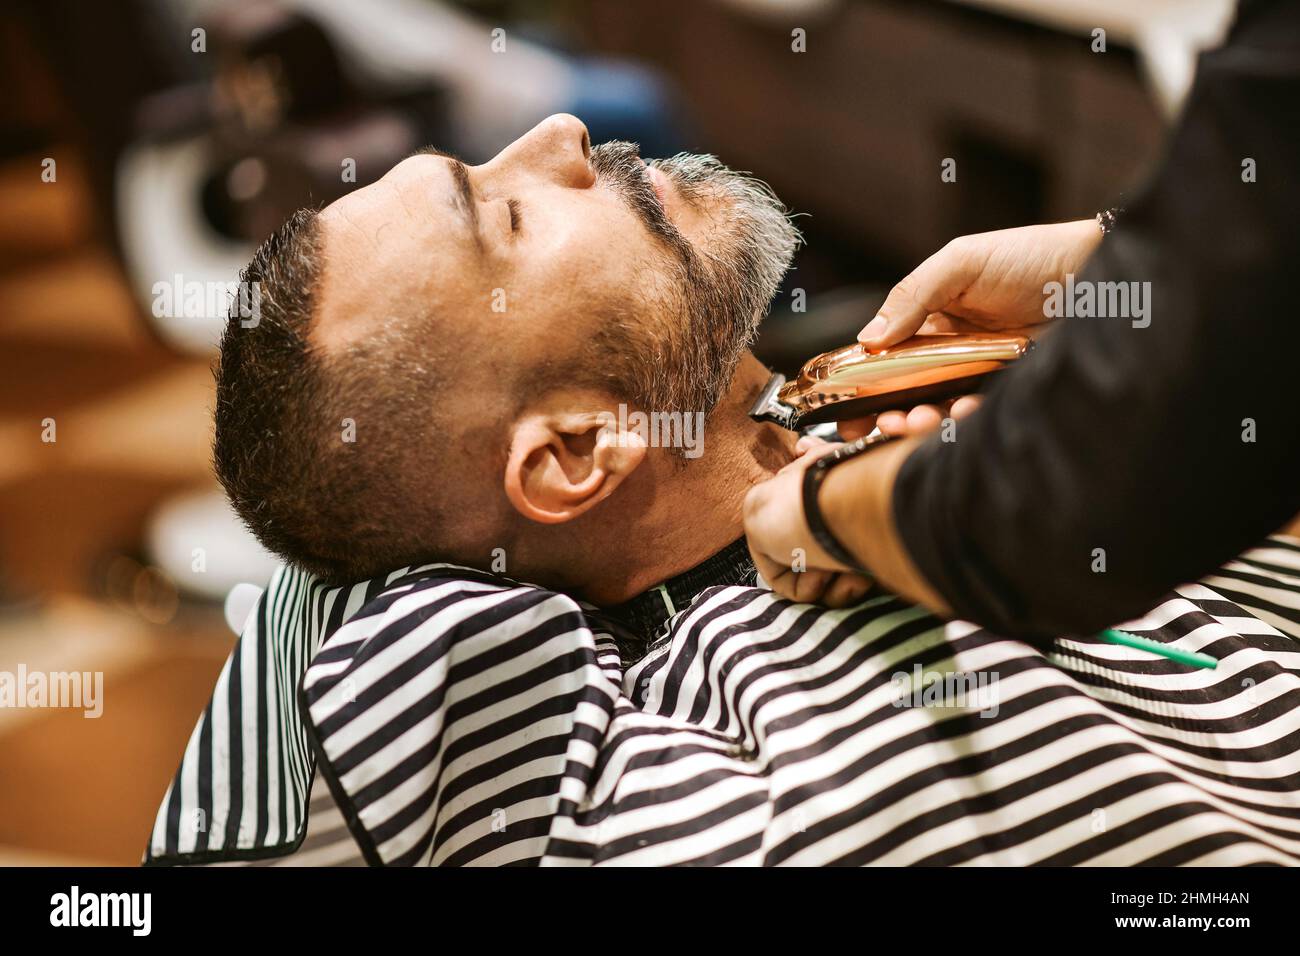 Barber trims the beard of the customer in his barber shop in a beauty and care concept Stock Photo